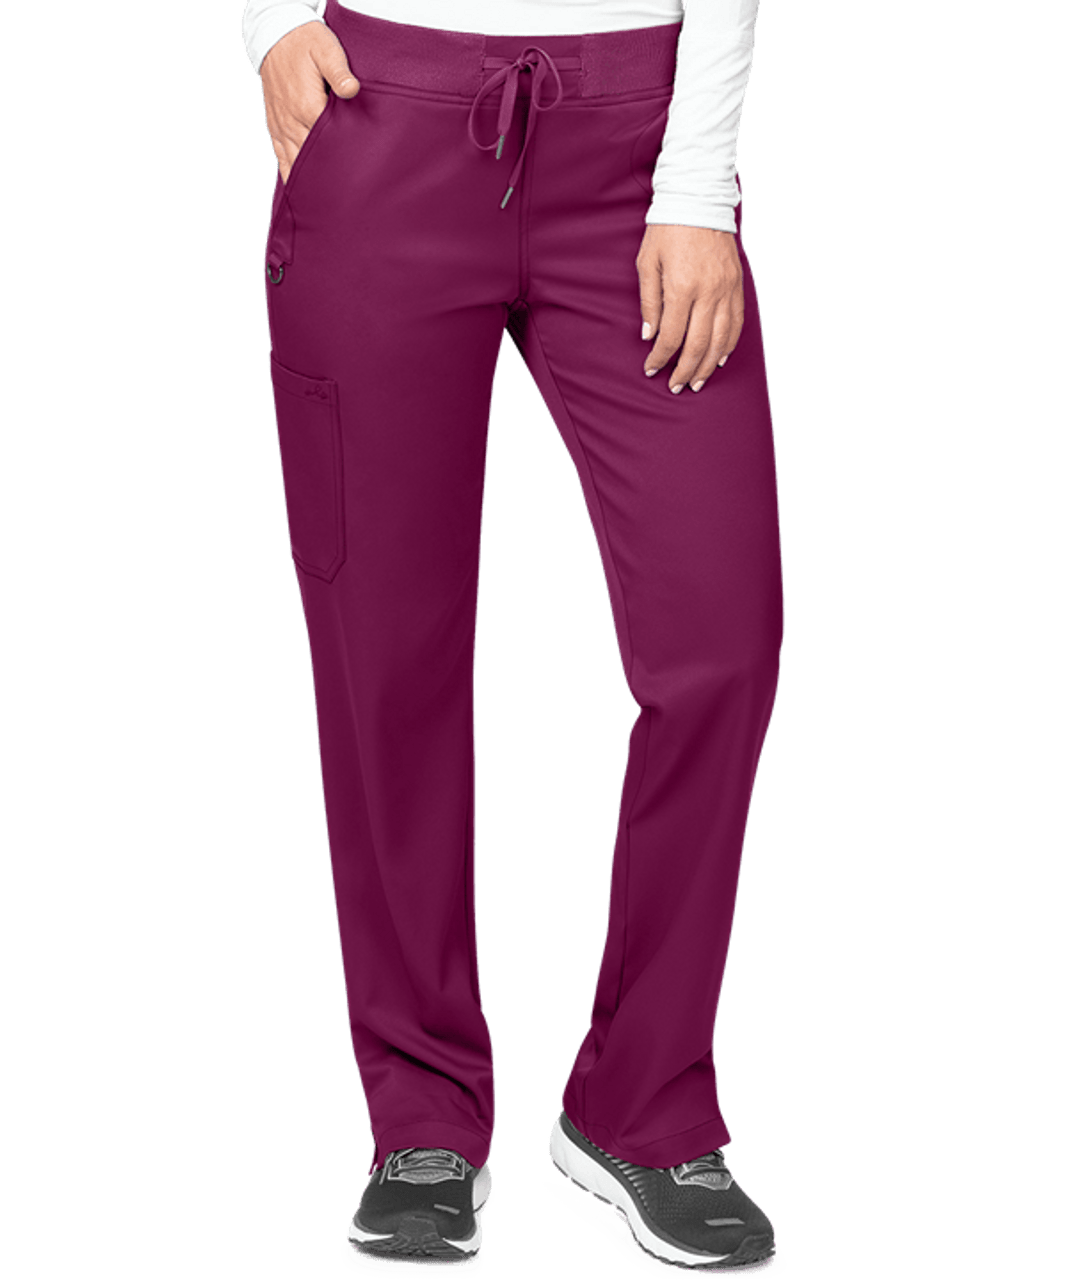 Valpark Shopping Plaza - Leggings scrub pants from Med Couture